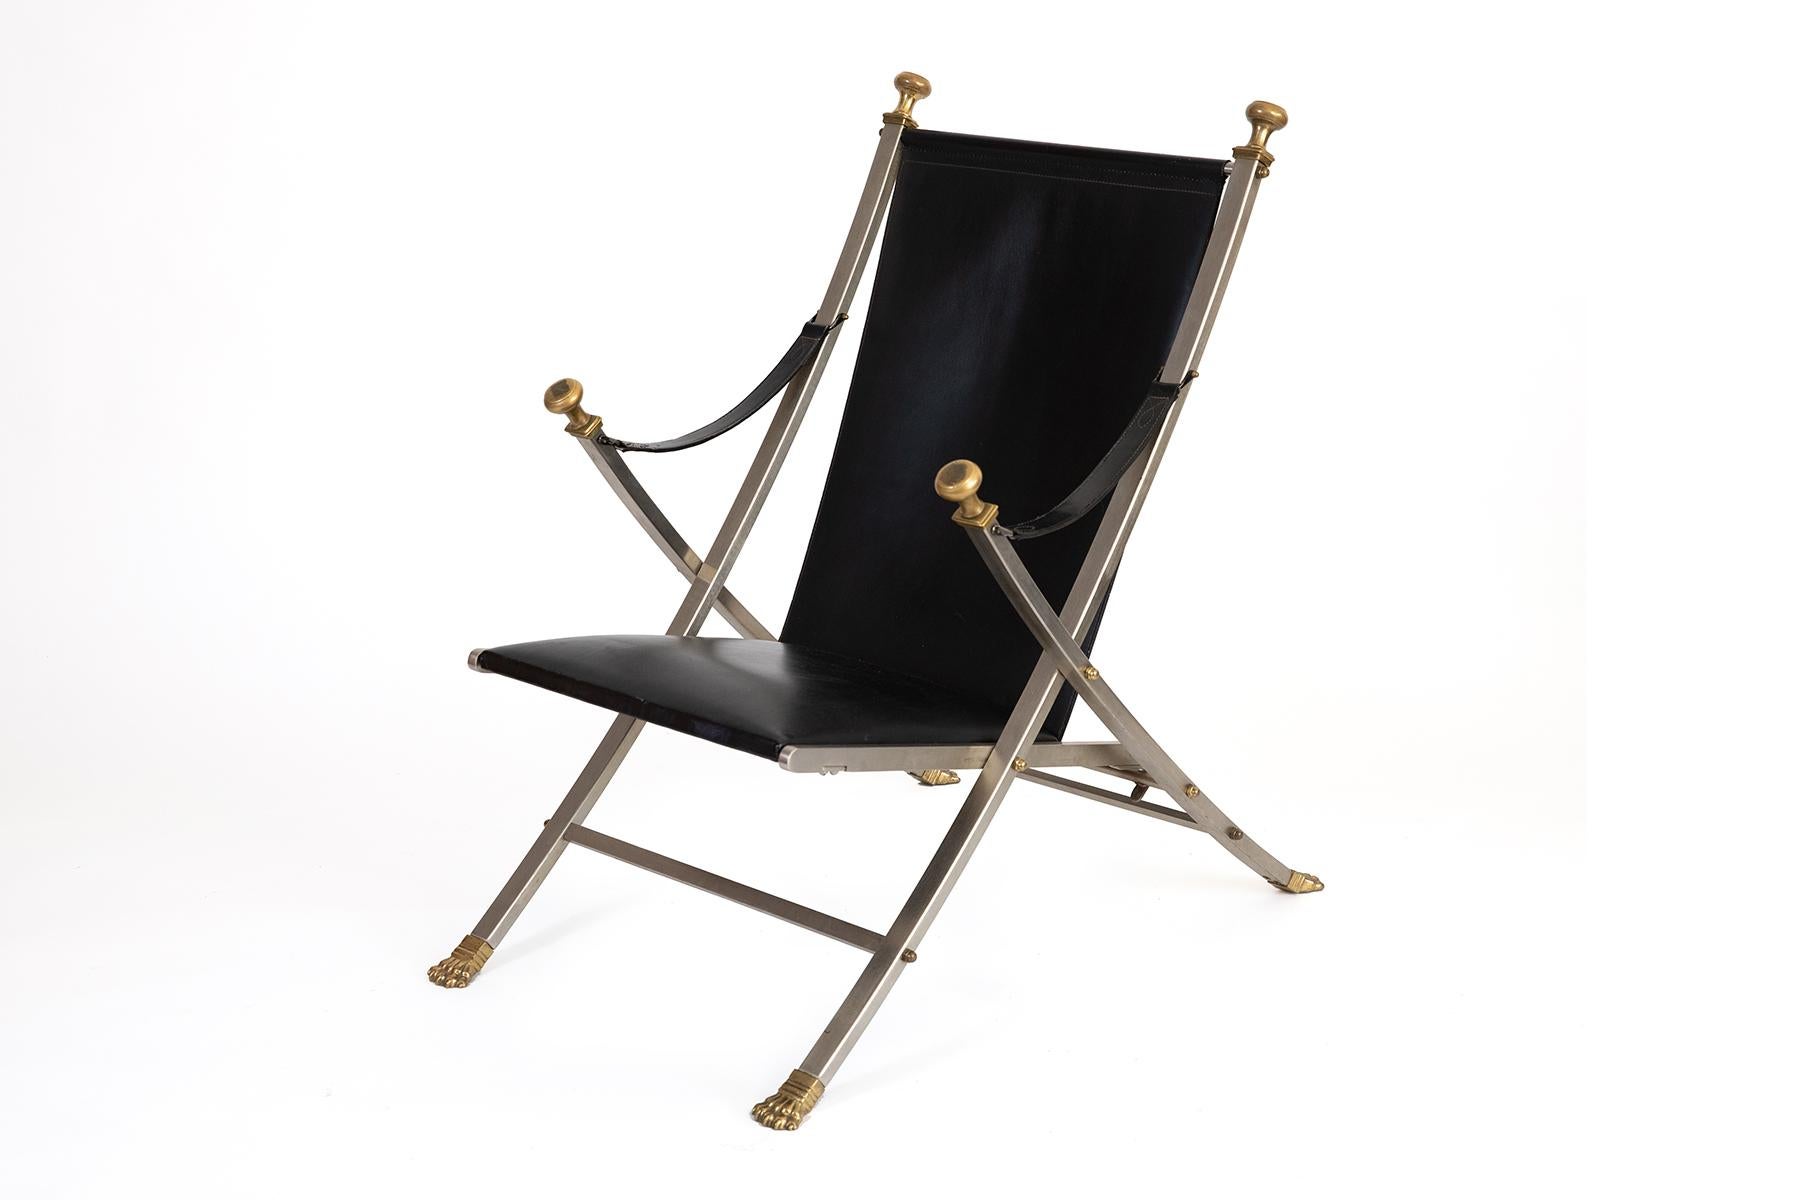 Maison Jansen stainless brass and leather lounge chair circa 1970. This all original example seamlessly combines midcentury flare with Art Nouveau beauty.